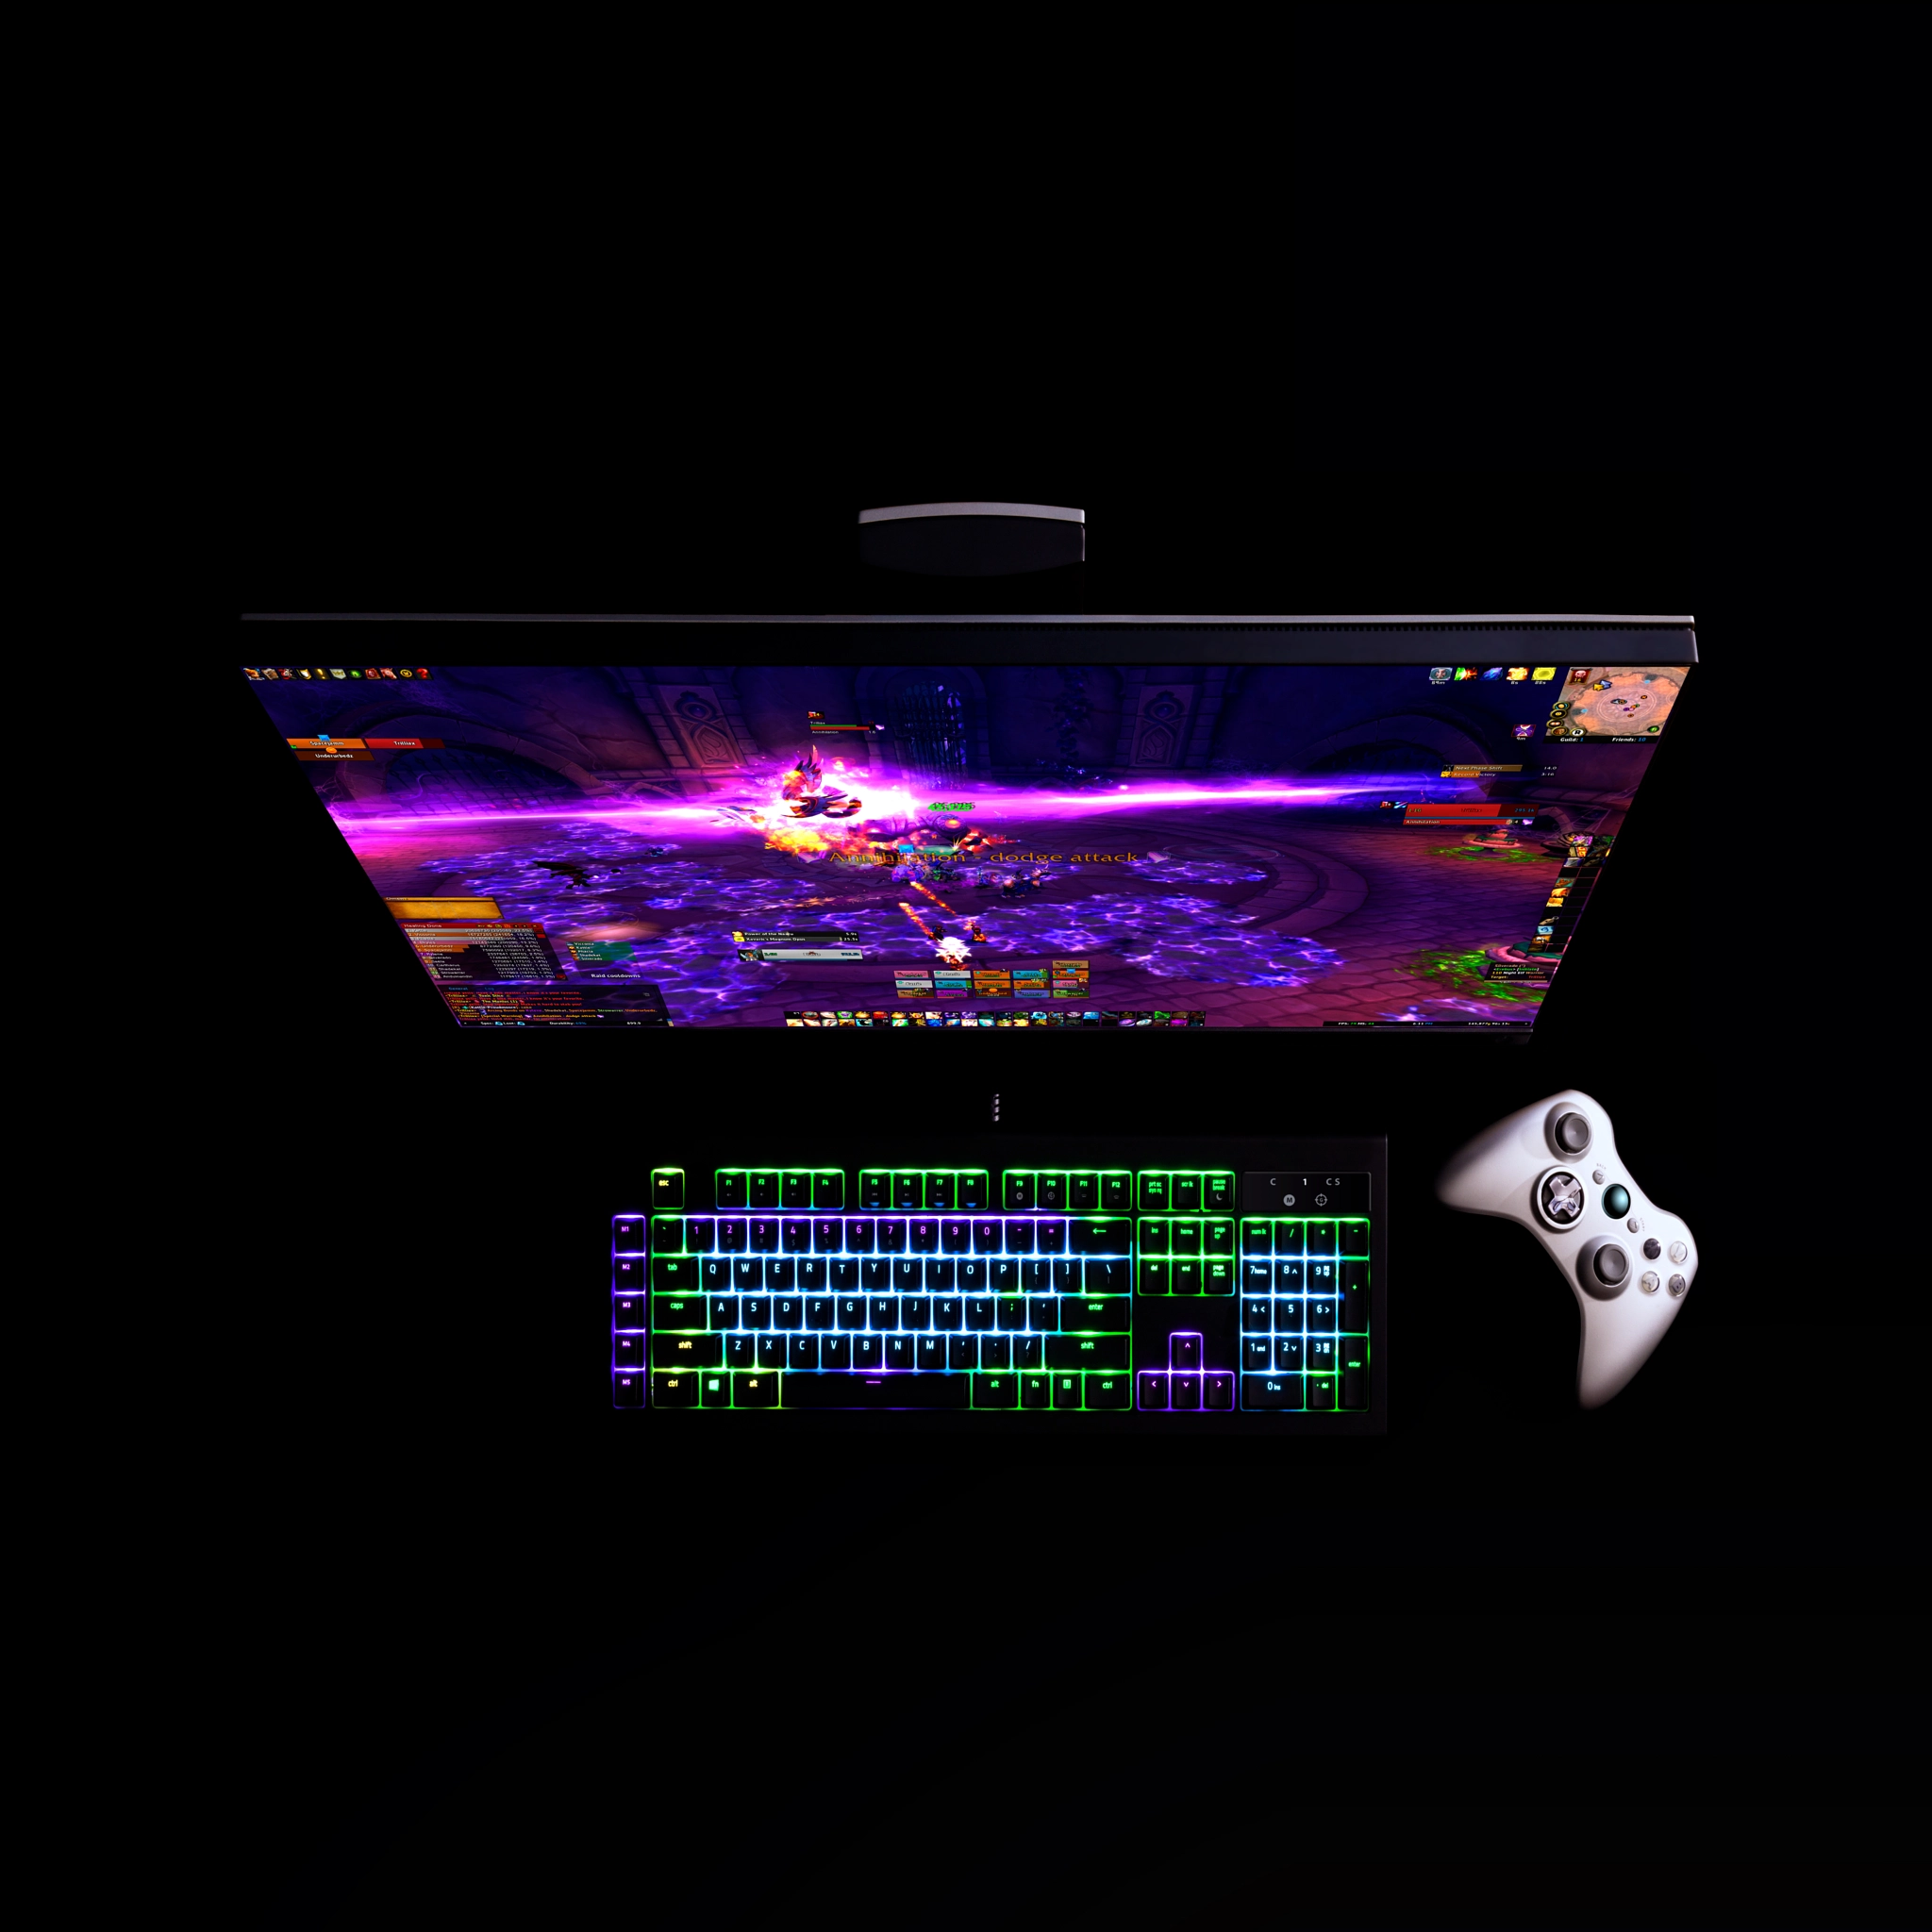 Stylized gamer computer with RGB lighting